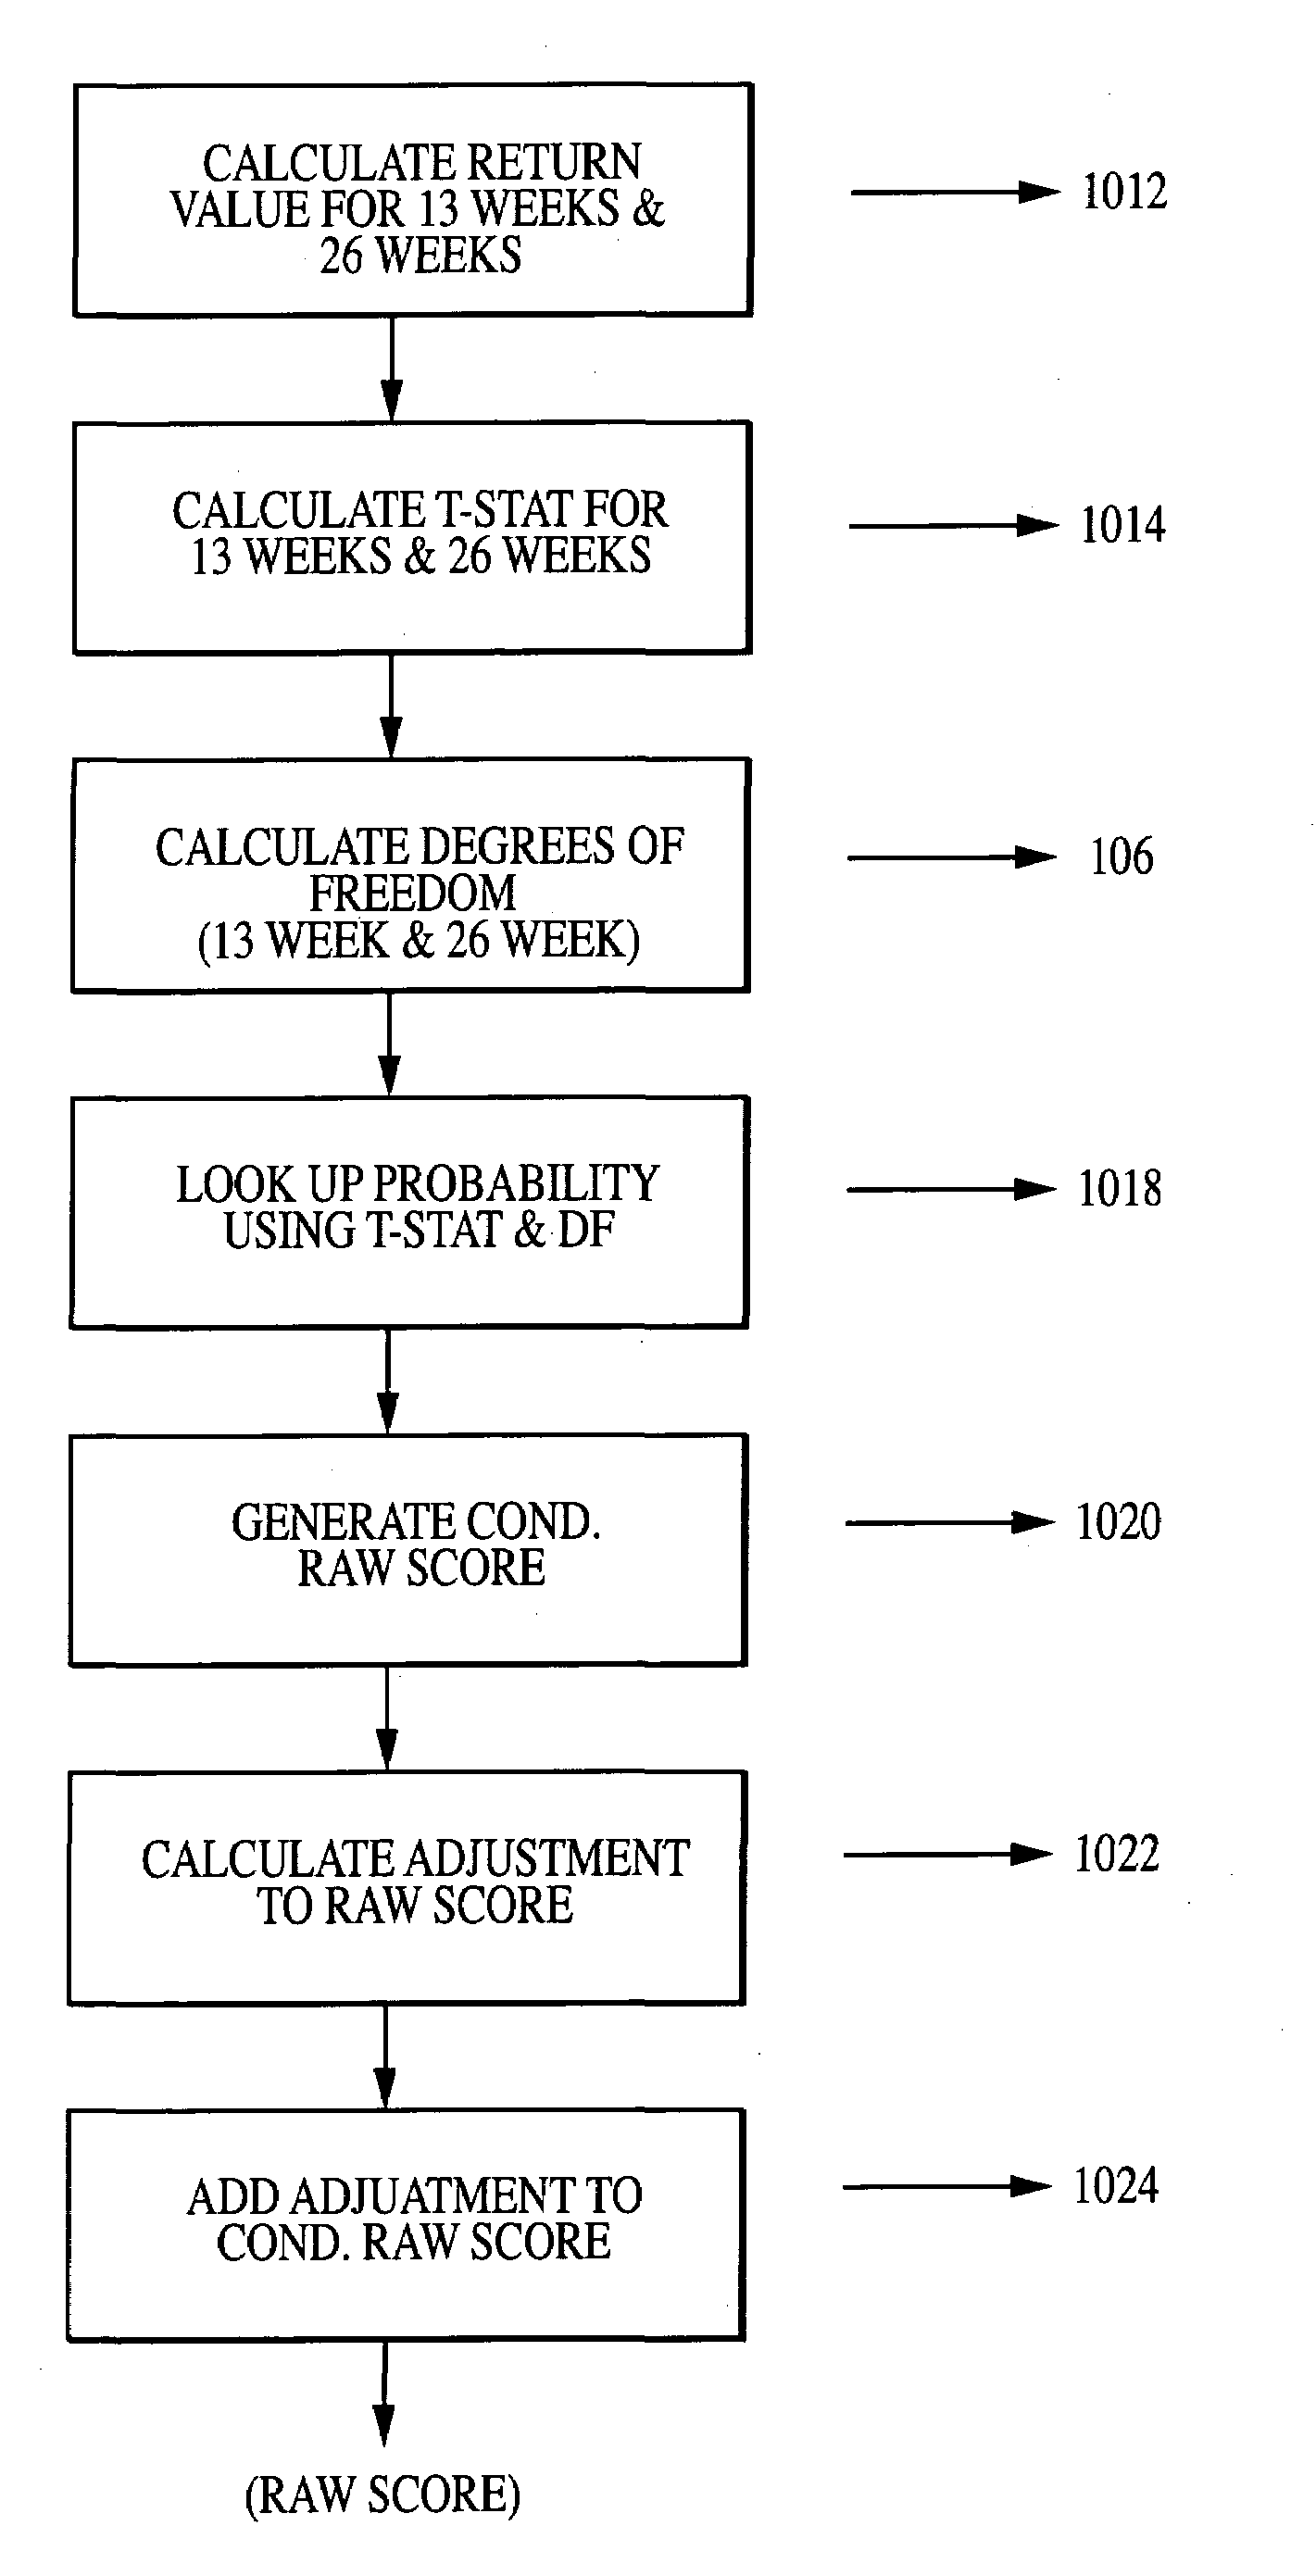 System, method and computer readable medium containing instructions for evaluating and disseminating investor performance information